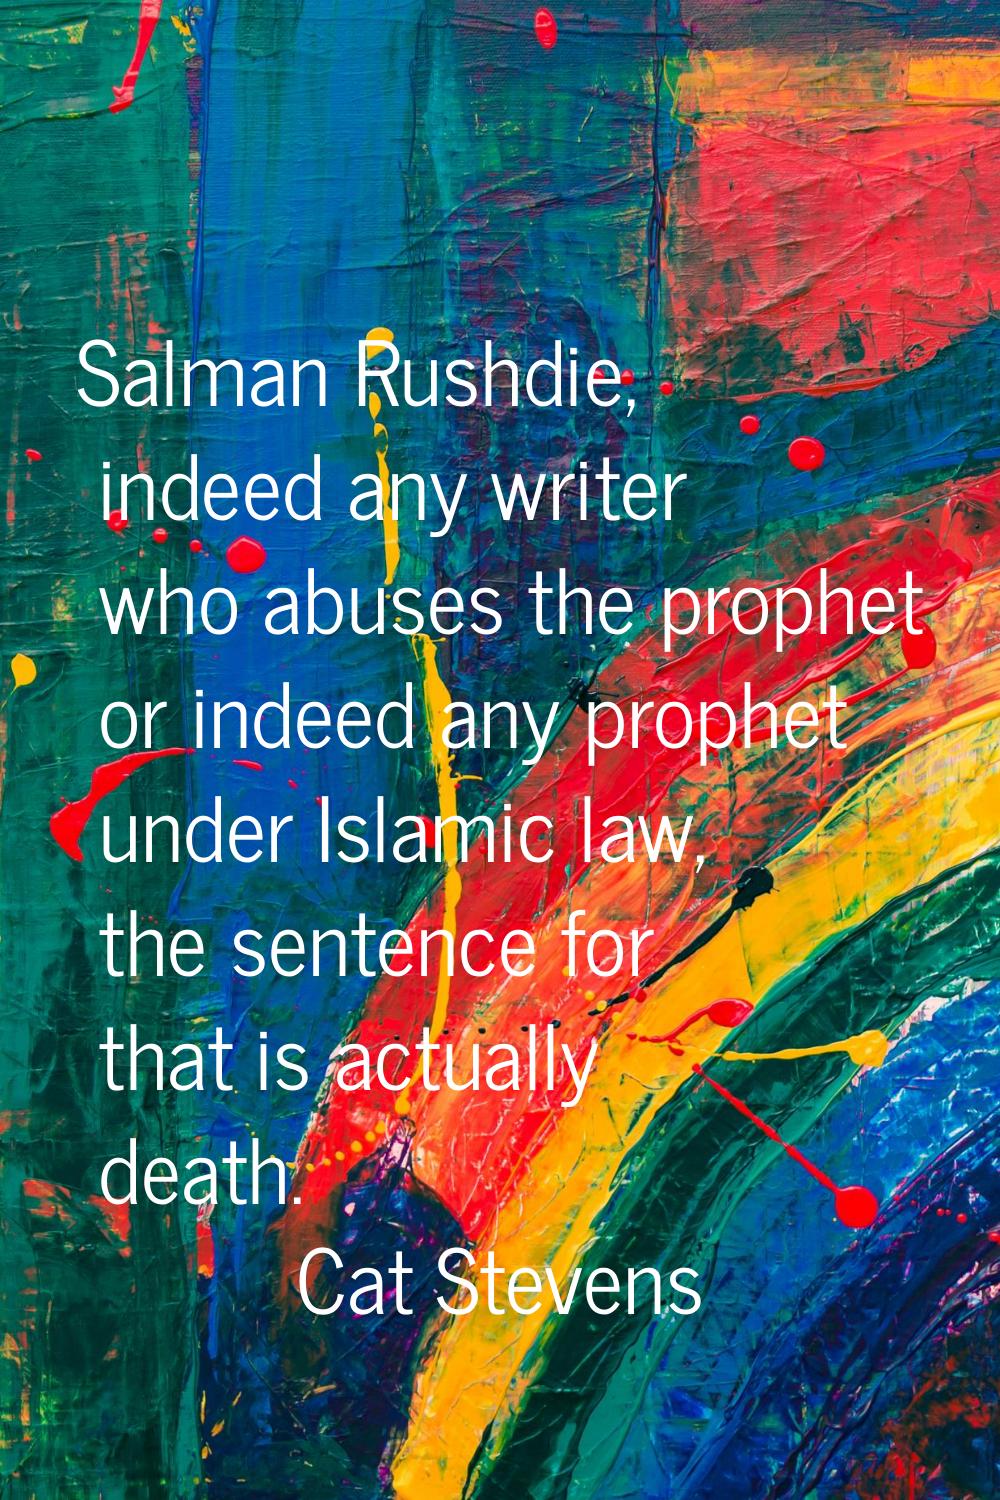 Salman Rushdie, indeed any writer who abuses the prophet or indeed any prophet under Islamic law, t